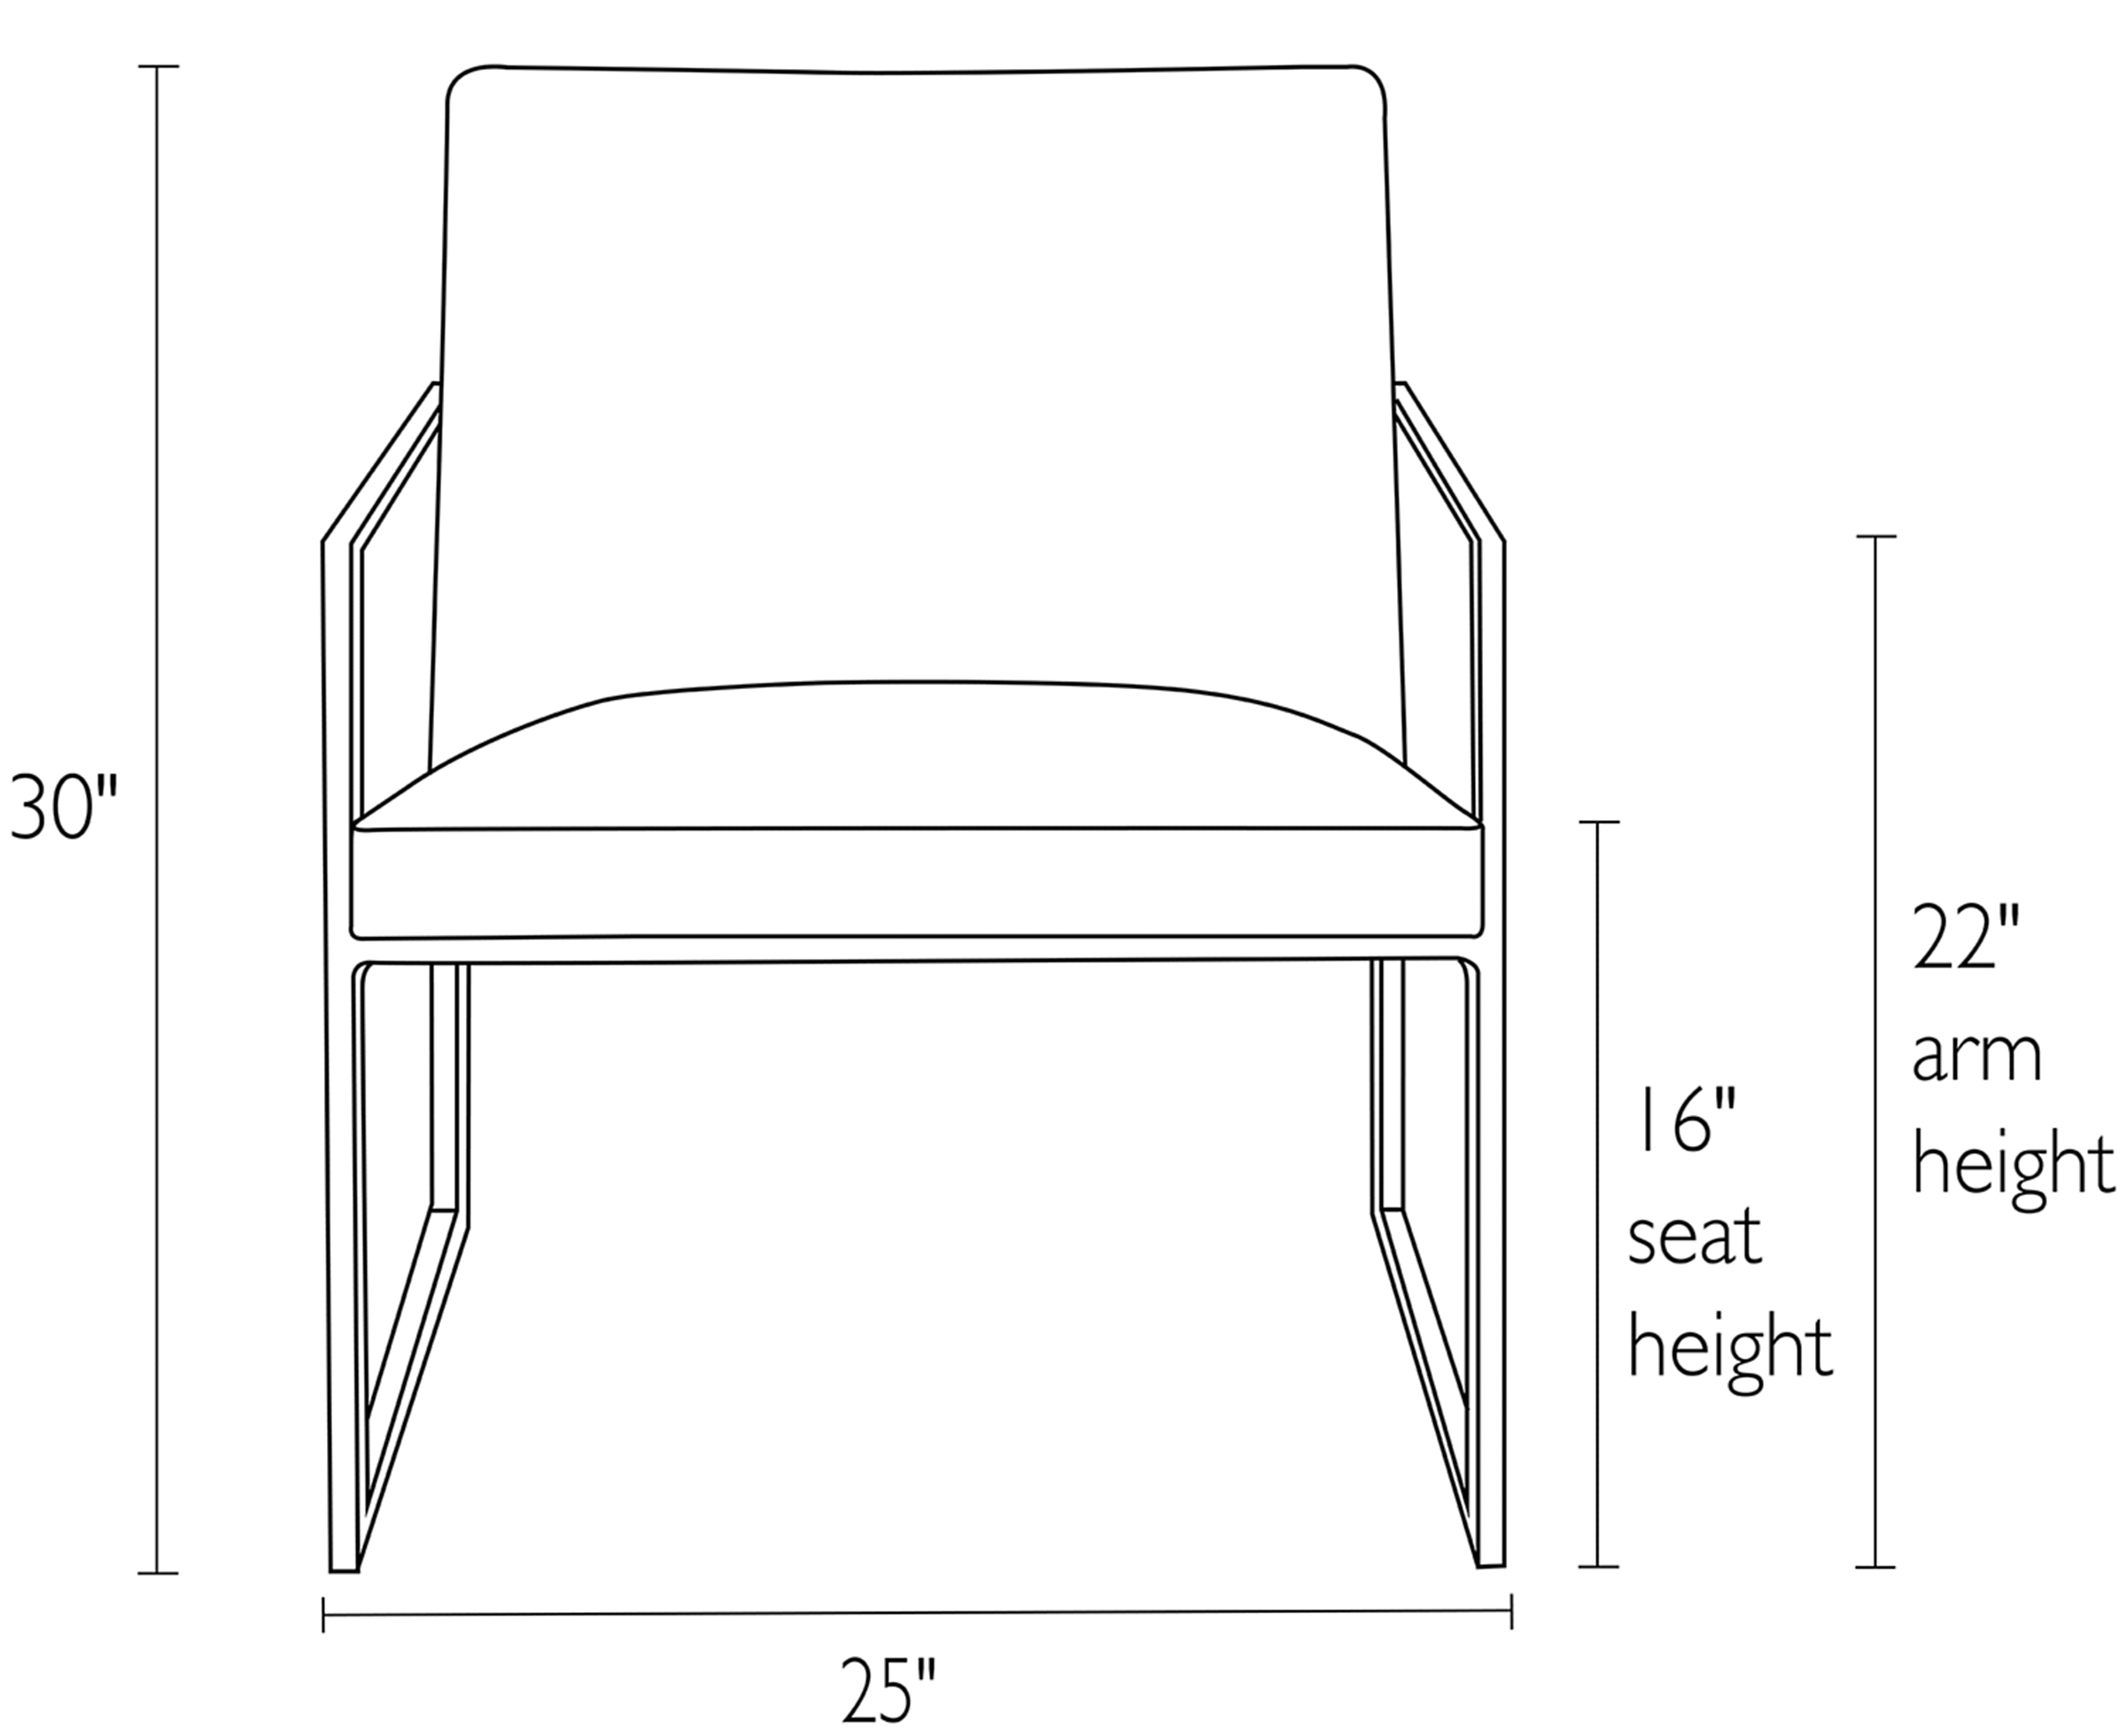 Front view dimension illustration of Novato chair.